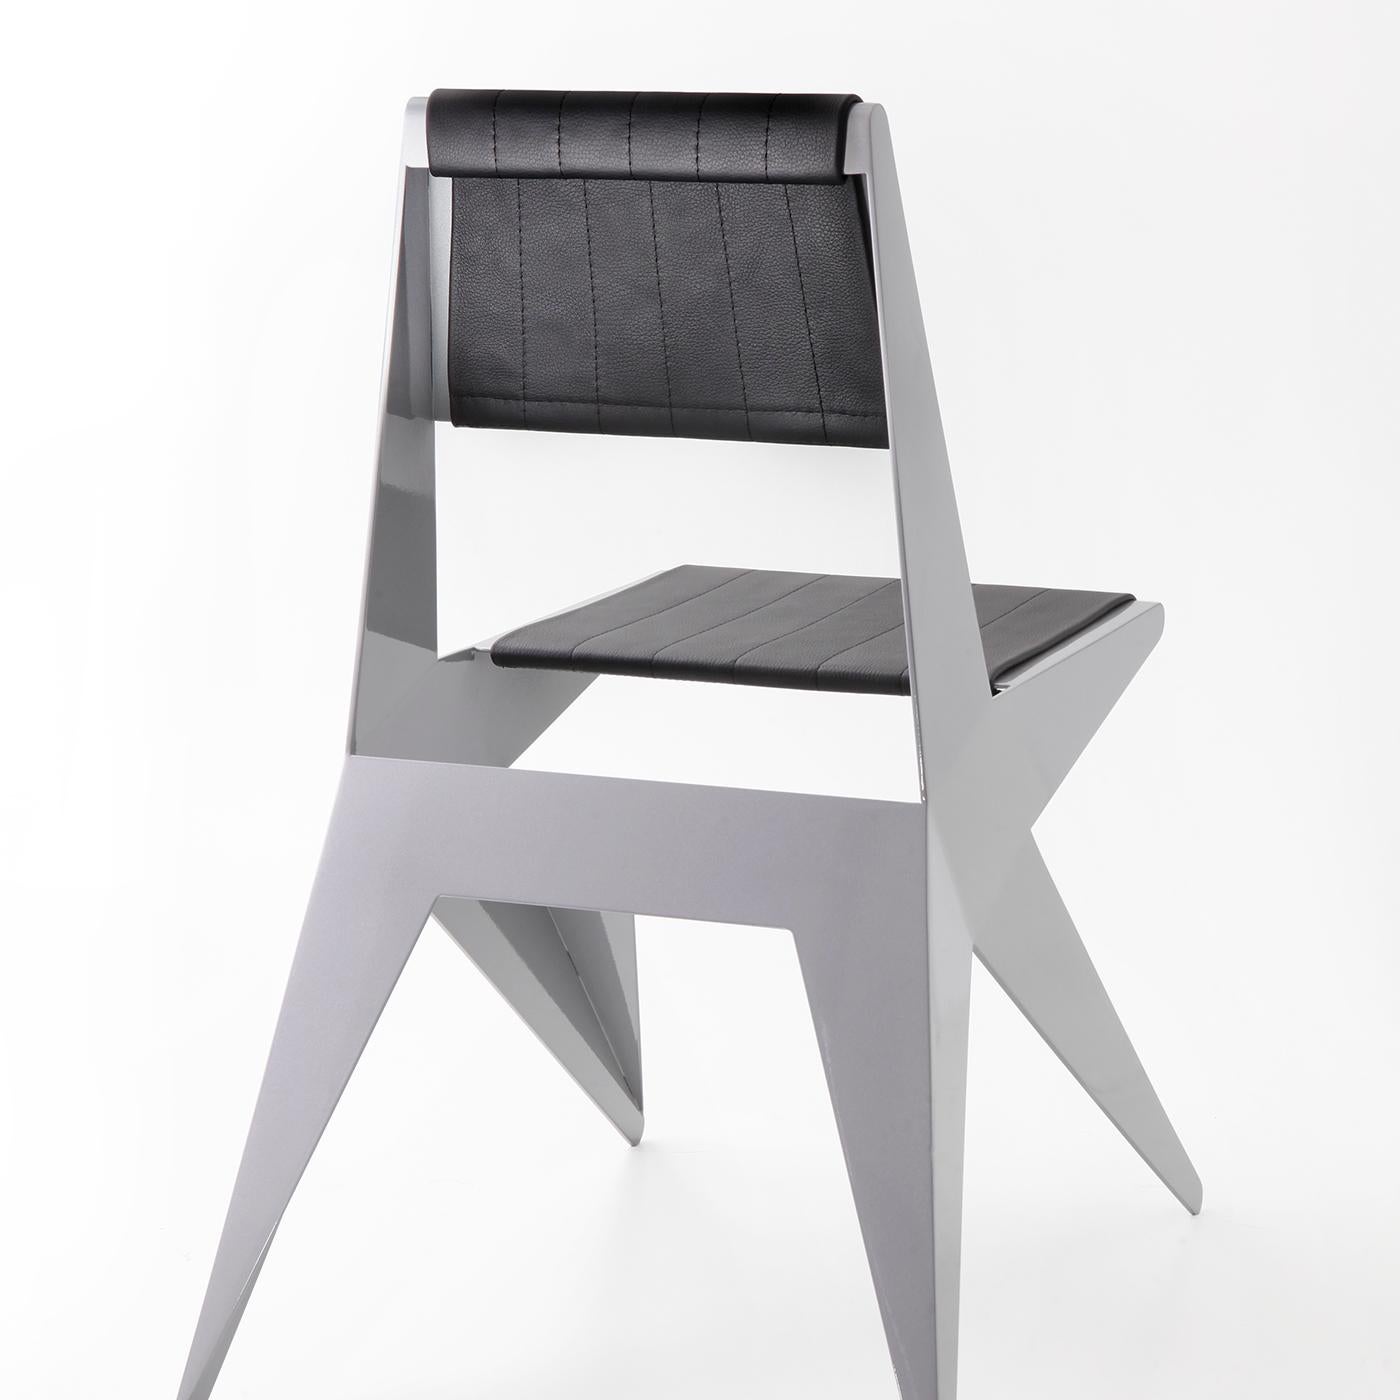 An eye-catching addition to both indoor and outdoor, this unique chair is handcrafted of a thin aluminum sheet, welded by hand and finished in a clear glossy coating. The pointy legs, squared back, and seat (H 47 cm) radiate from the centre creating